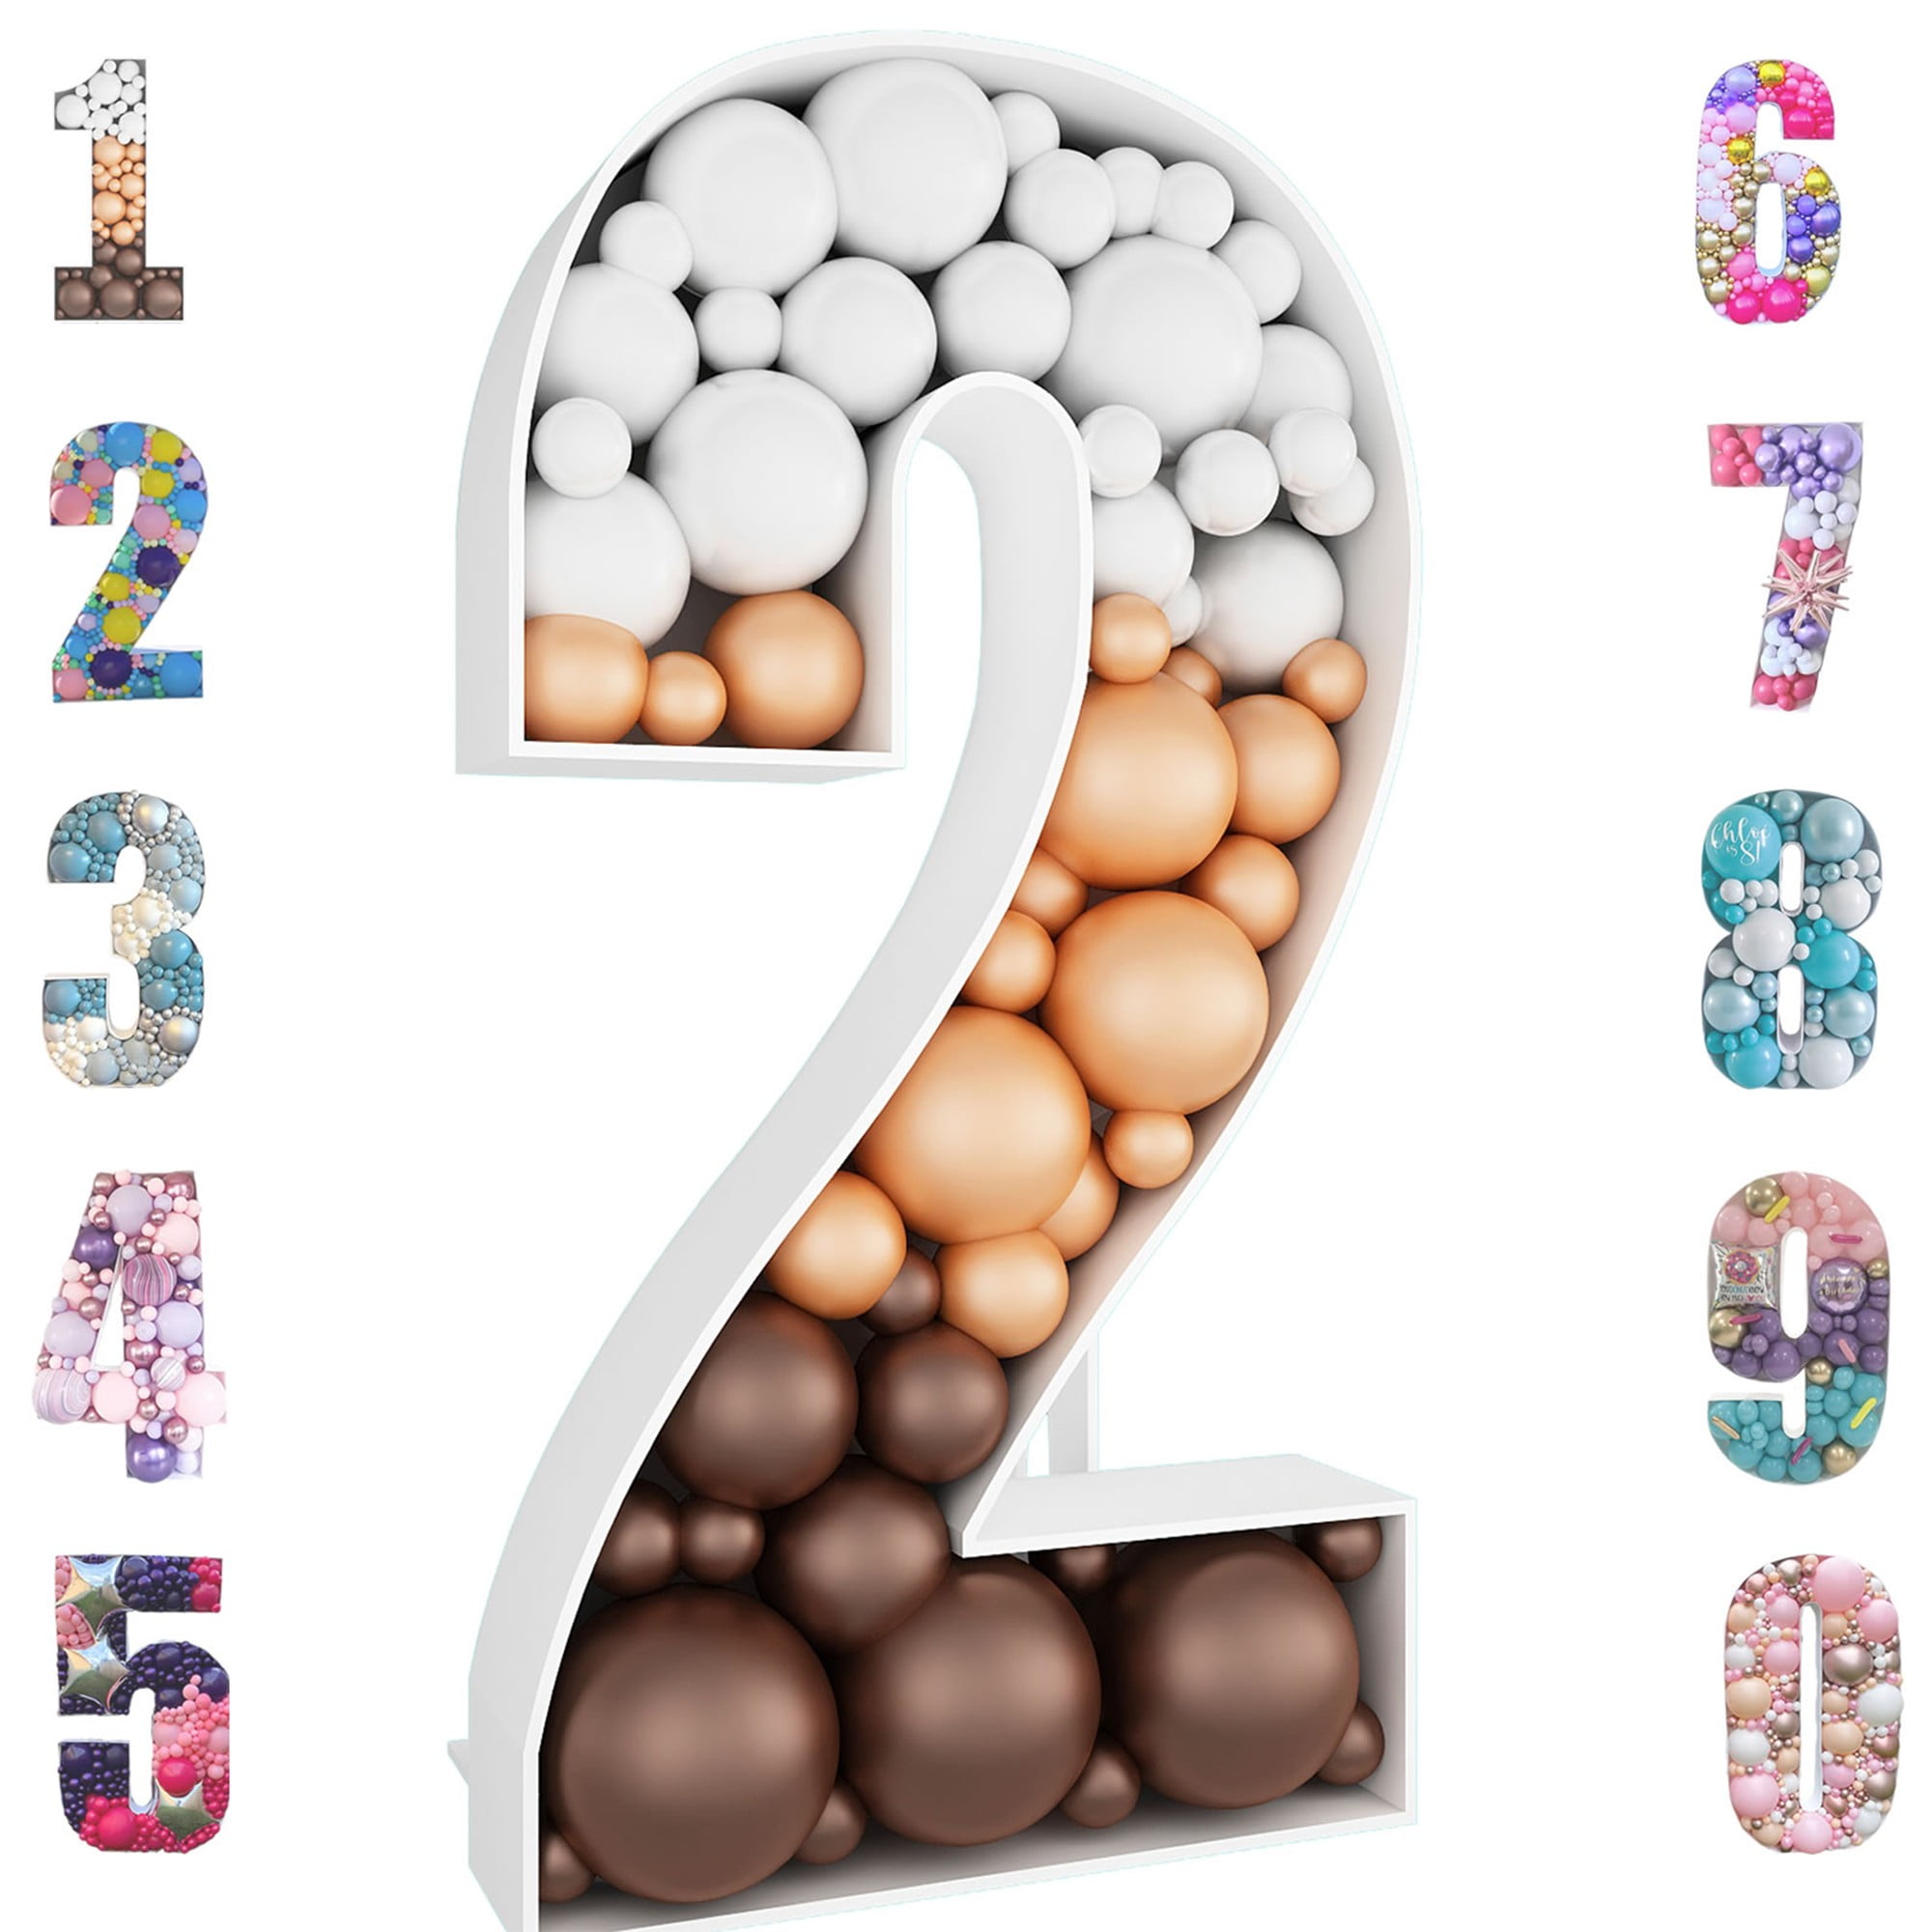  imprsv Marquee Numbers, 4FT Marquee Light Up Numbers for 5th  Party Birthday Decorations, Mosaic Numbers for Balloons, Large Cardboard  Numbers, Number Five Balloon Frame, Number Blocks Birthday Decor : Home 